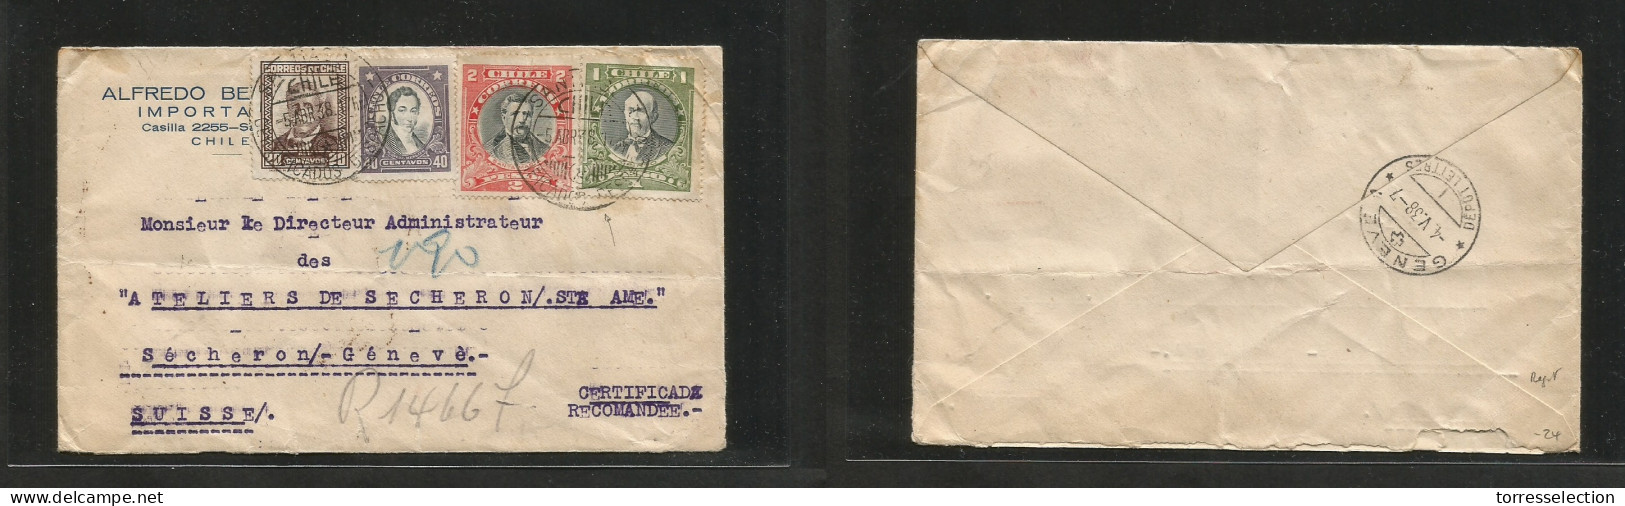 Chile - XX. 1938 (5 Apr) Santiago - Switzerland, Geneve (4 May) Registered Multifkd Env. 3,60 Peso Rate. SALE. - Chile